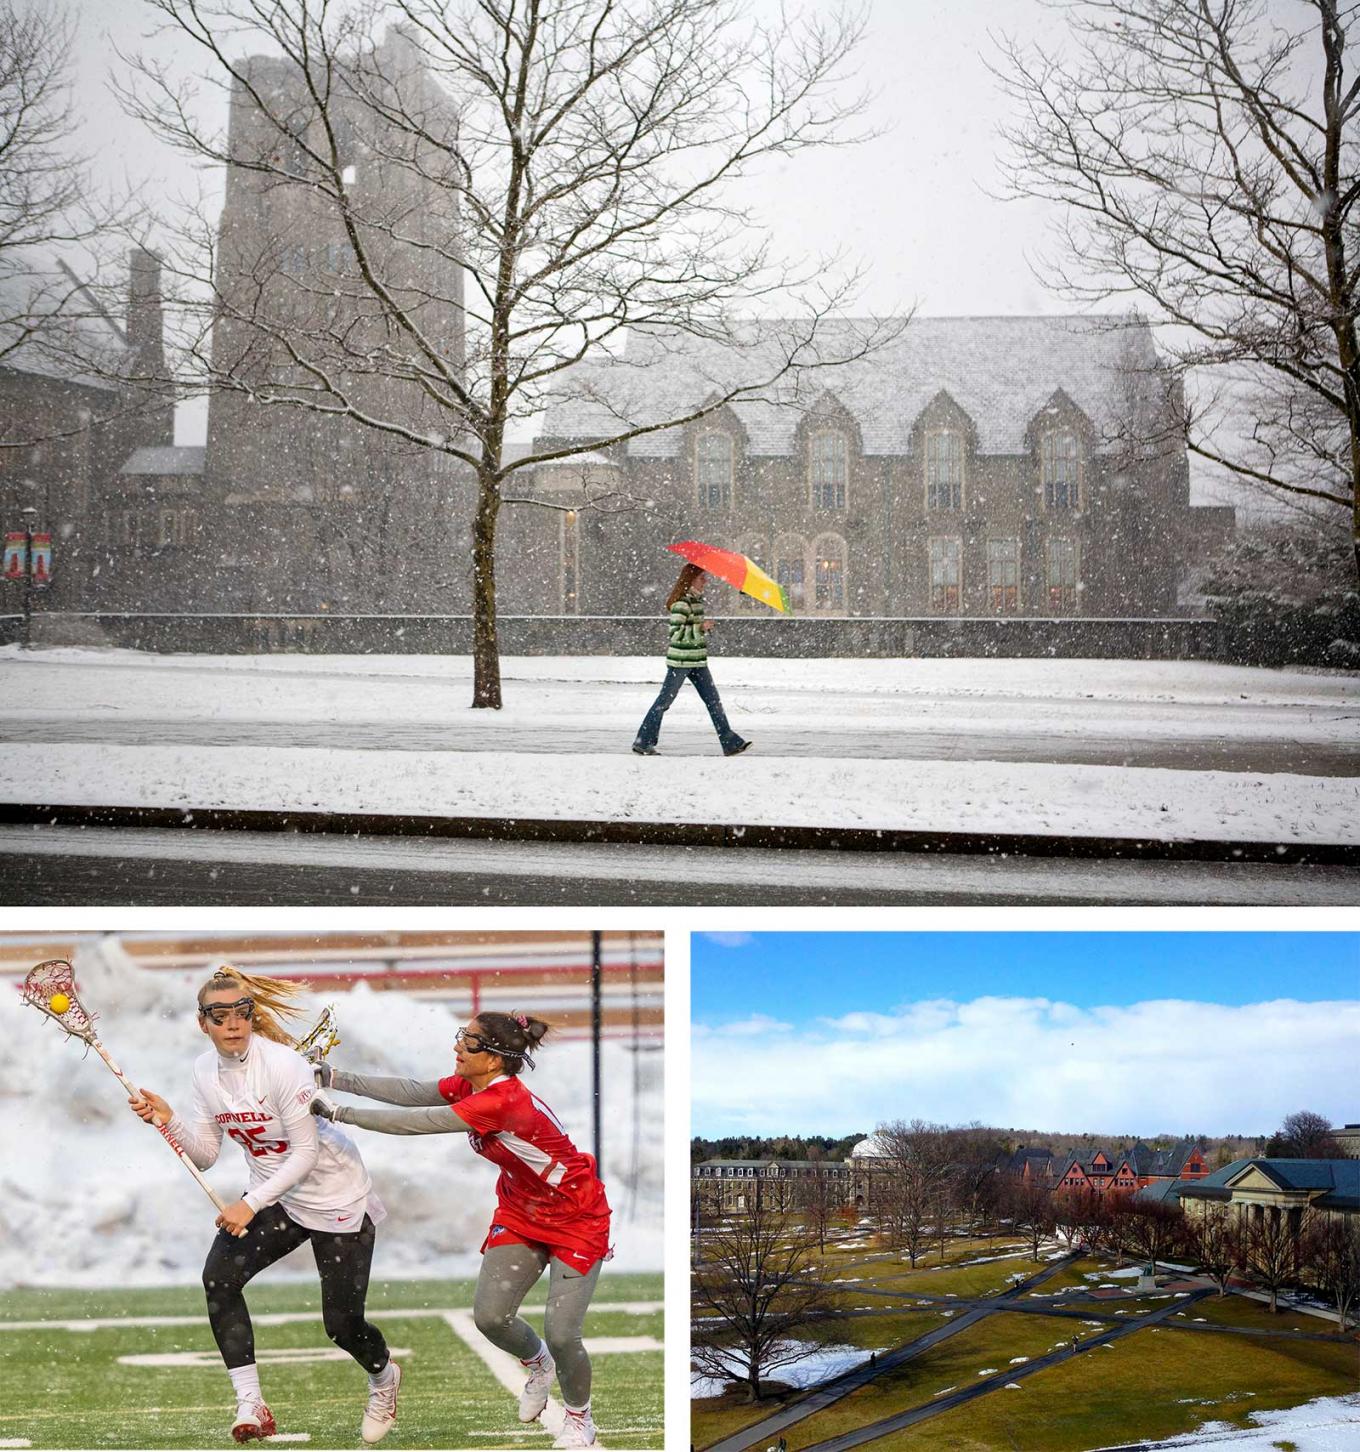 A lone student walks along a snowy quad. Two women play field hokey. An aerial view of the arts quad.